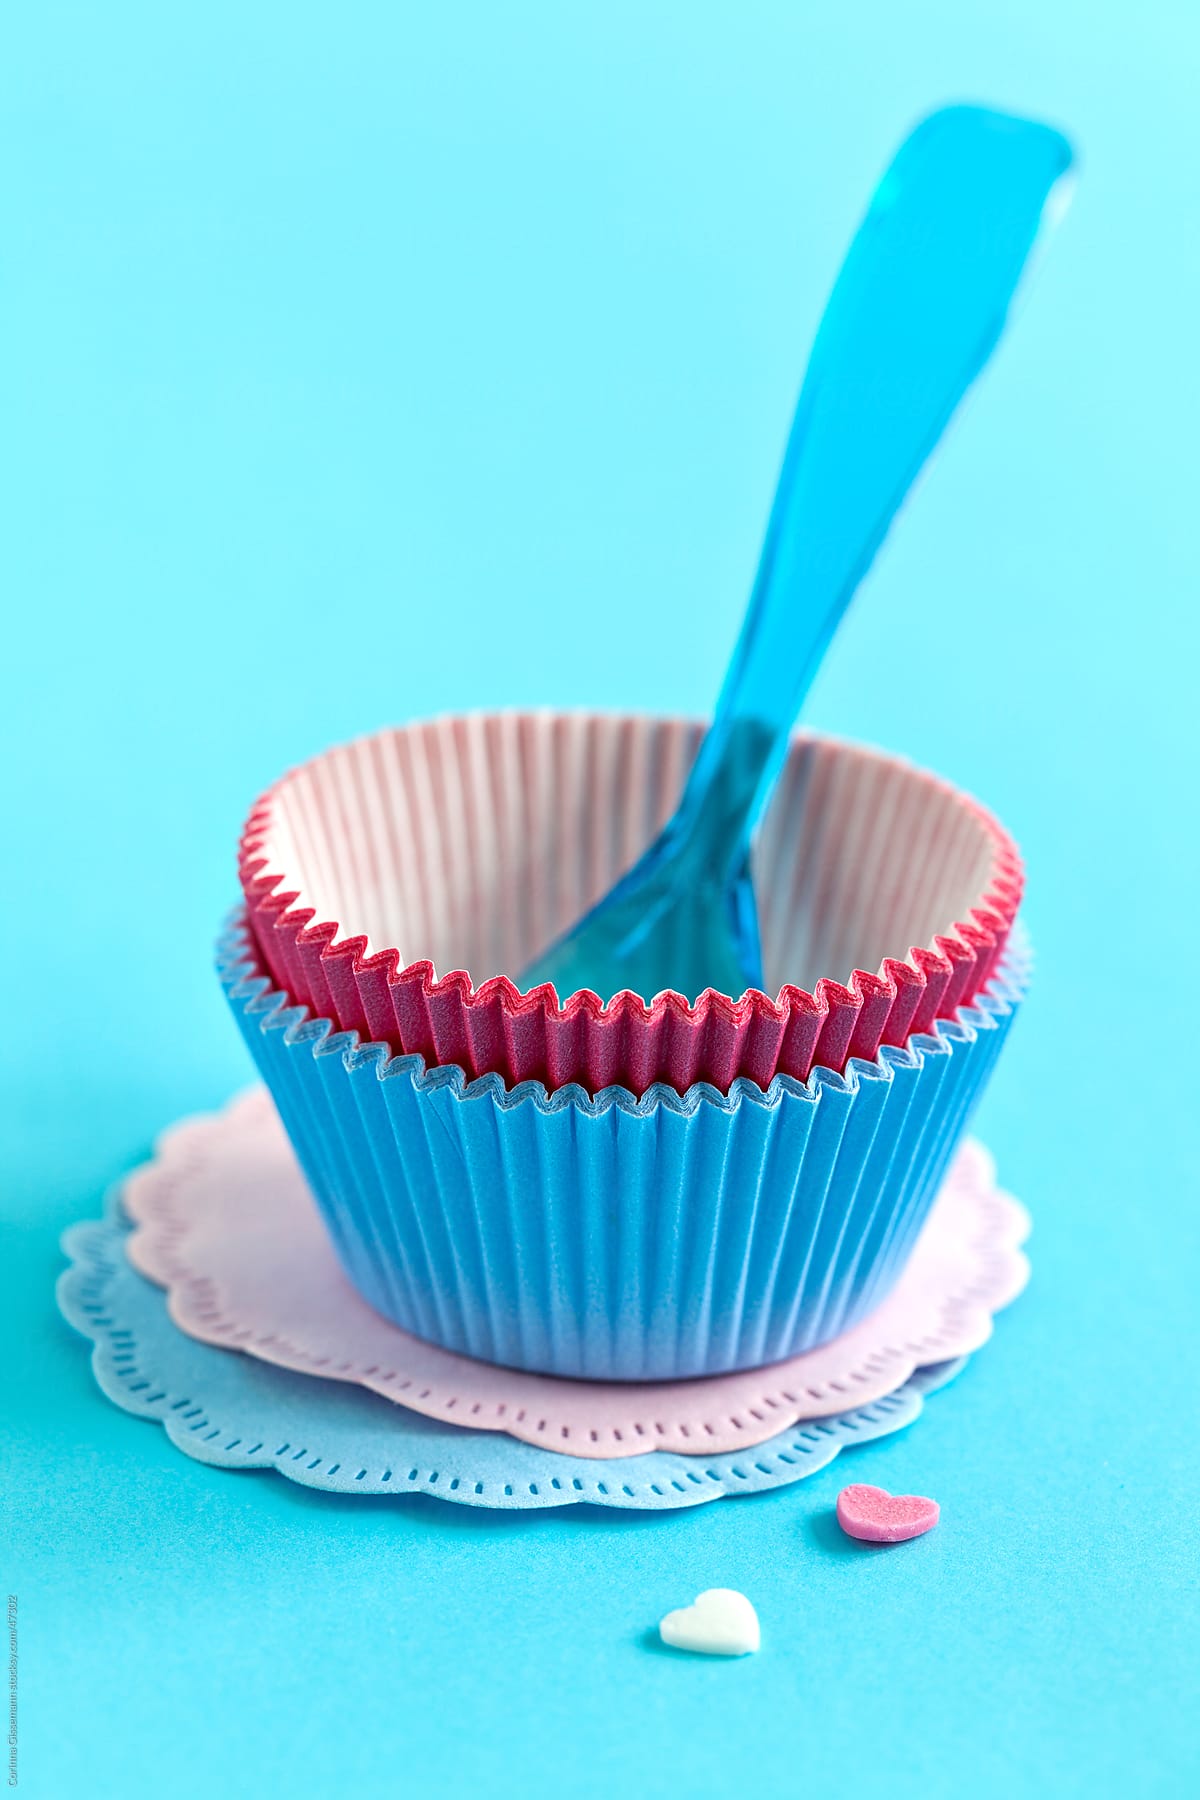 still life of pink and blue baking tin on blue background with spoon